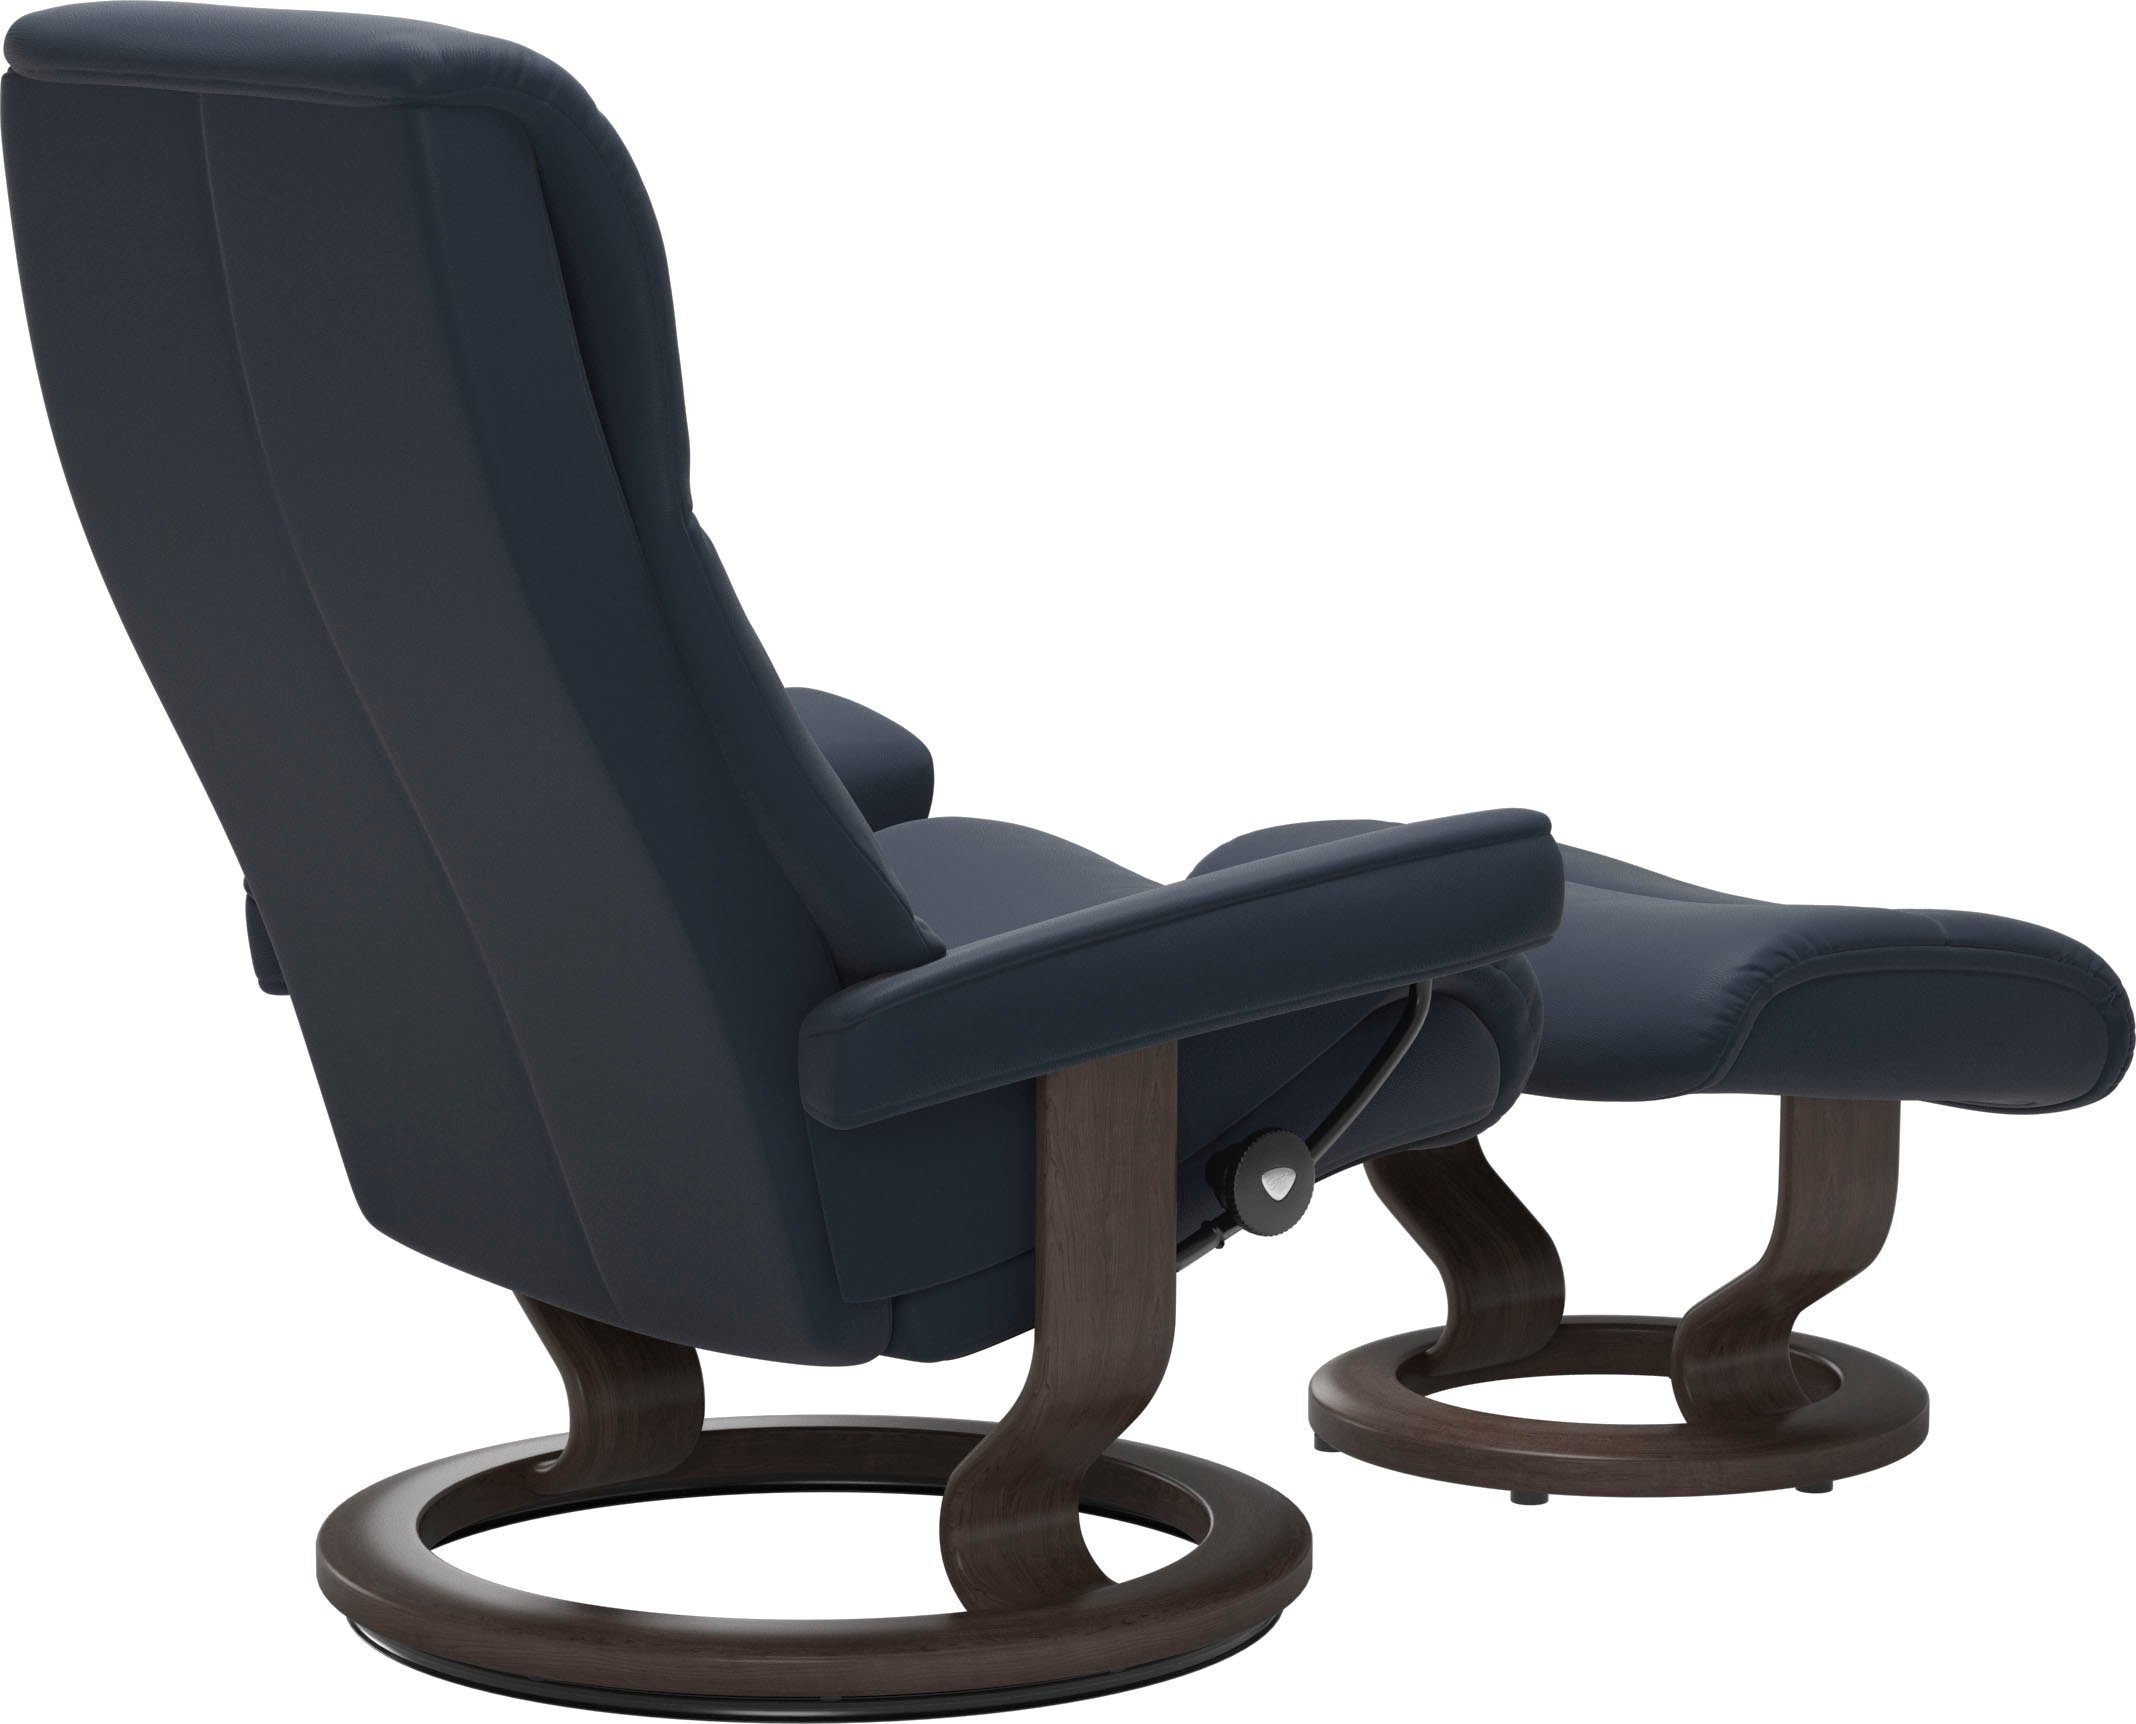 mit Wenge Base, Classic S,Gestell View, Relaxsessel Größe Stressless®